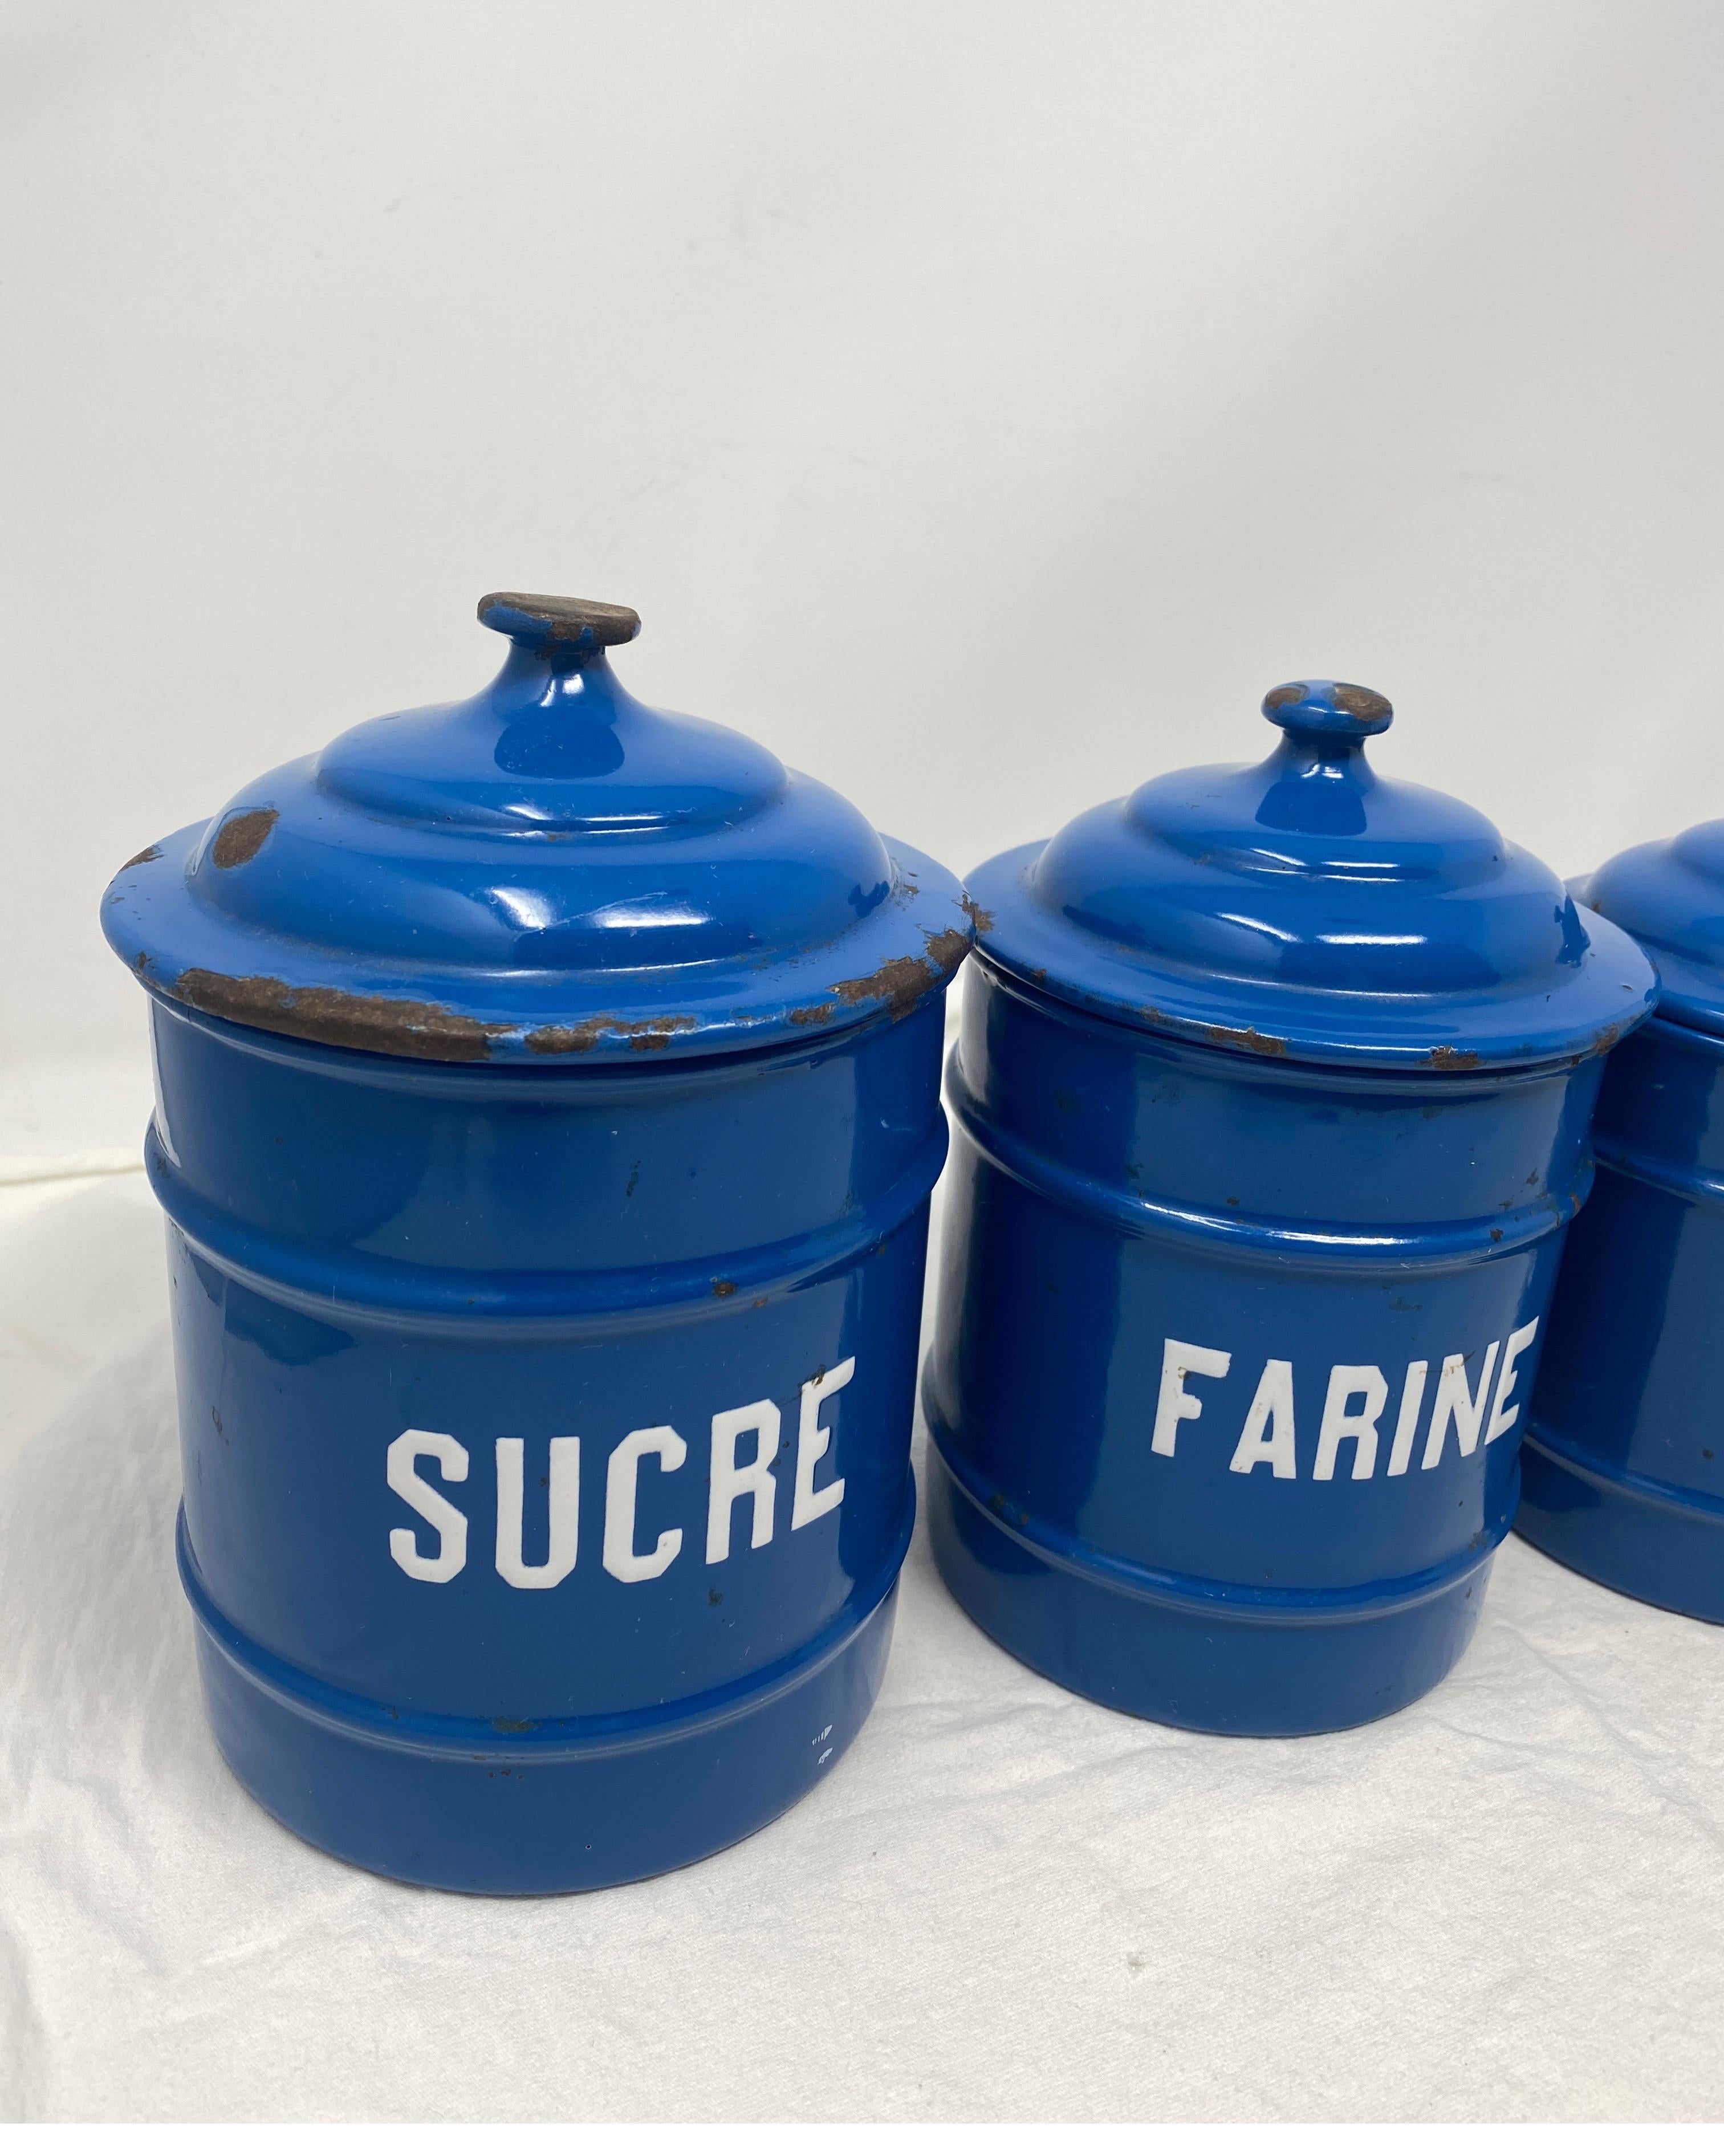 We found this French antique set of 5 enameled canisters, circa 1920s in Southern France. The charming canisters complete with their original lids, once a staple in every French kitchen, are cobalt blue with white raised print and are graduated in